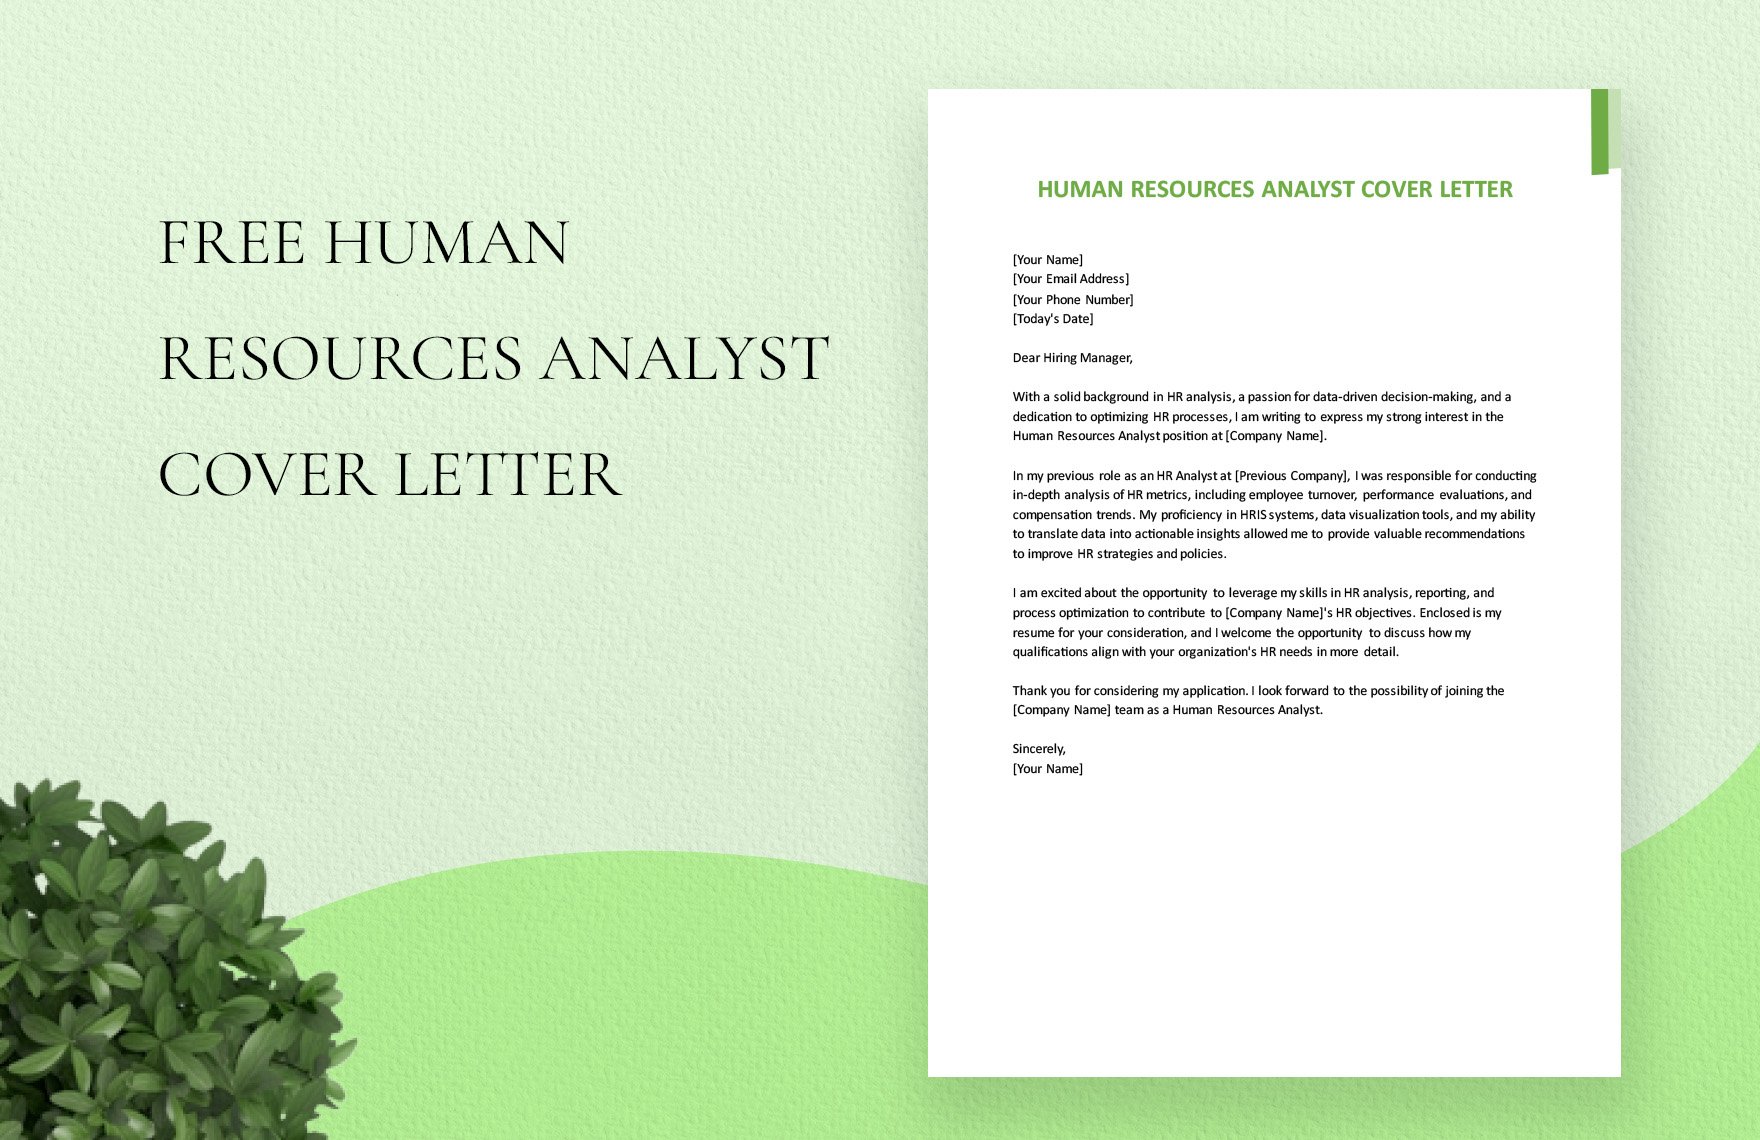 Human Resources Analyst Cover Letter in Word, Google Docs, PDF